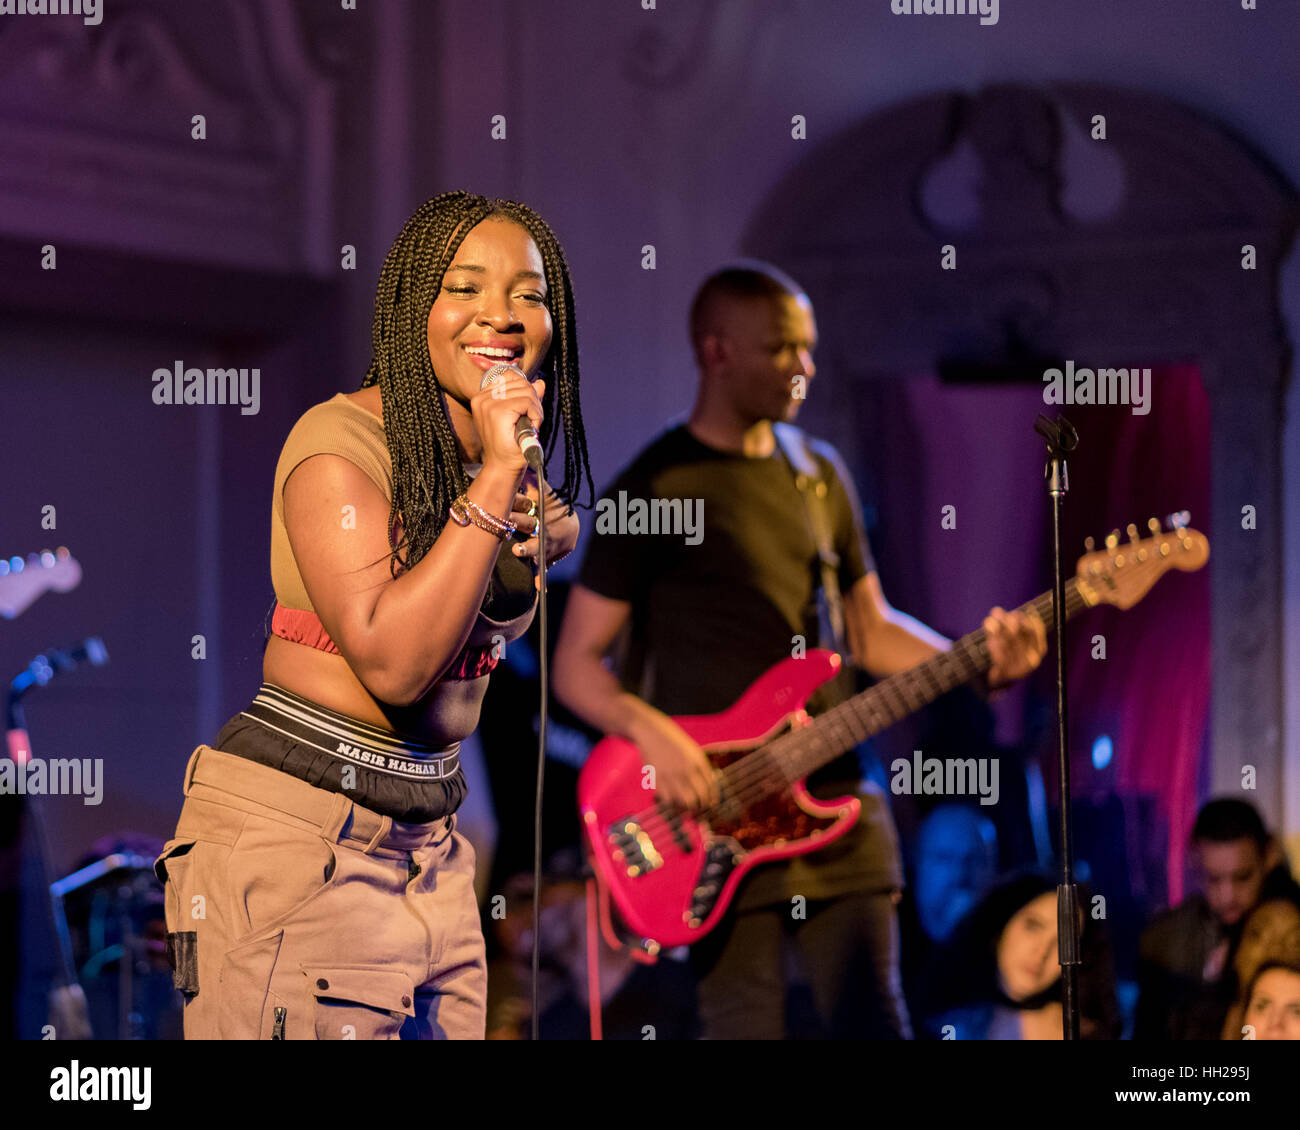 Ray BLK singing with her band at a live concert in September 2016. Stock Photo